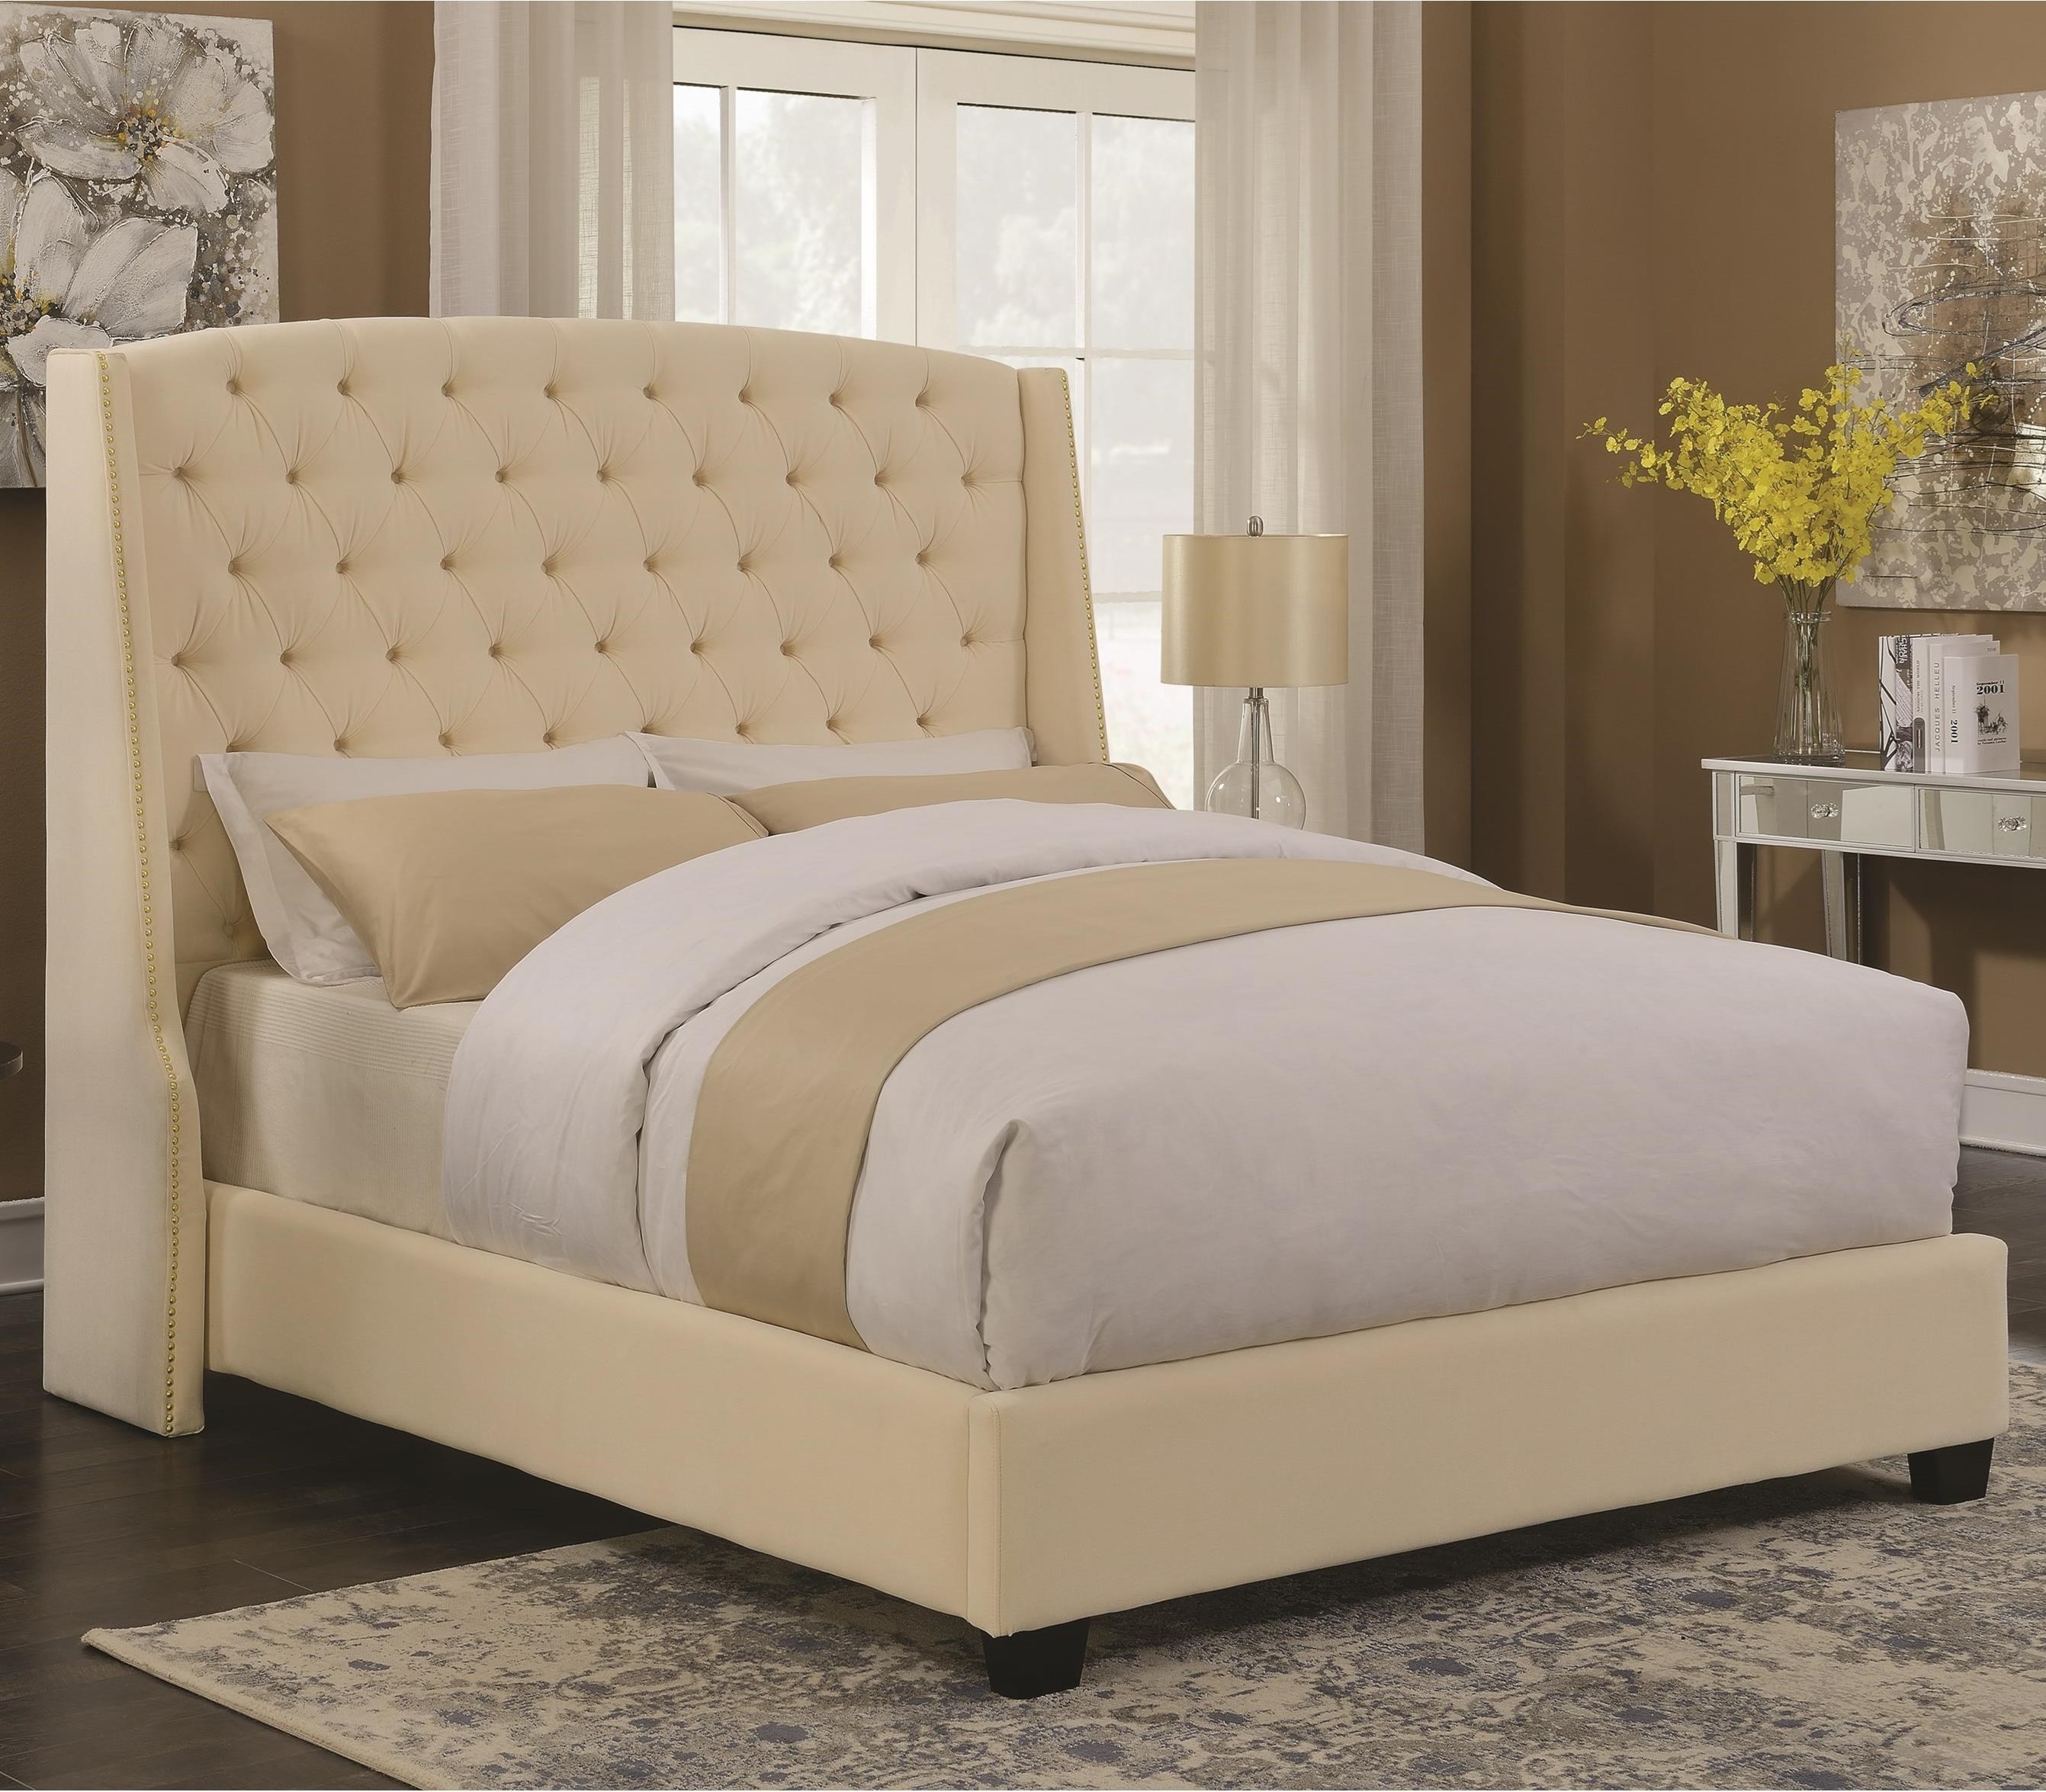 Upholstered Beds Pissarro Wingback Upholstered Queen Bed by Coaster